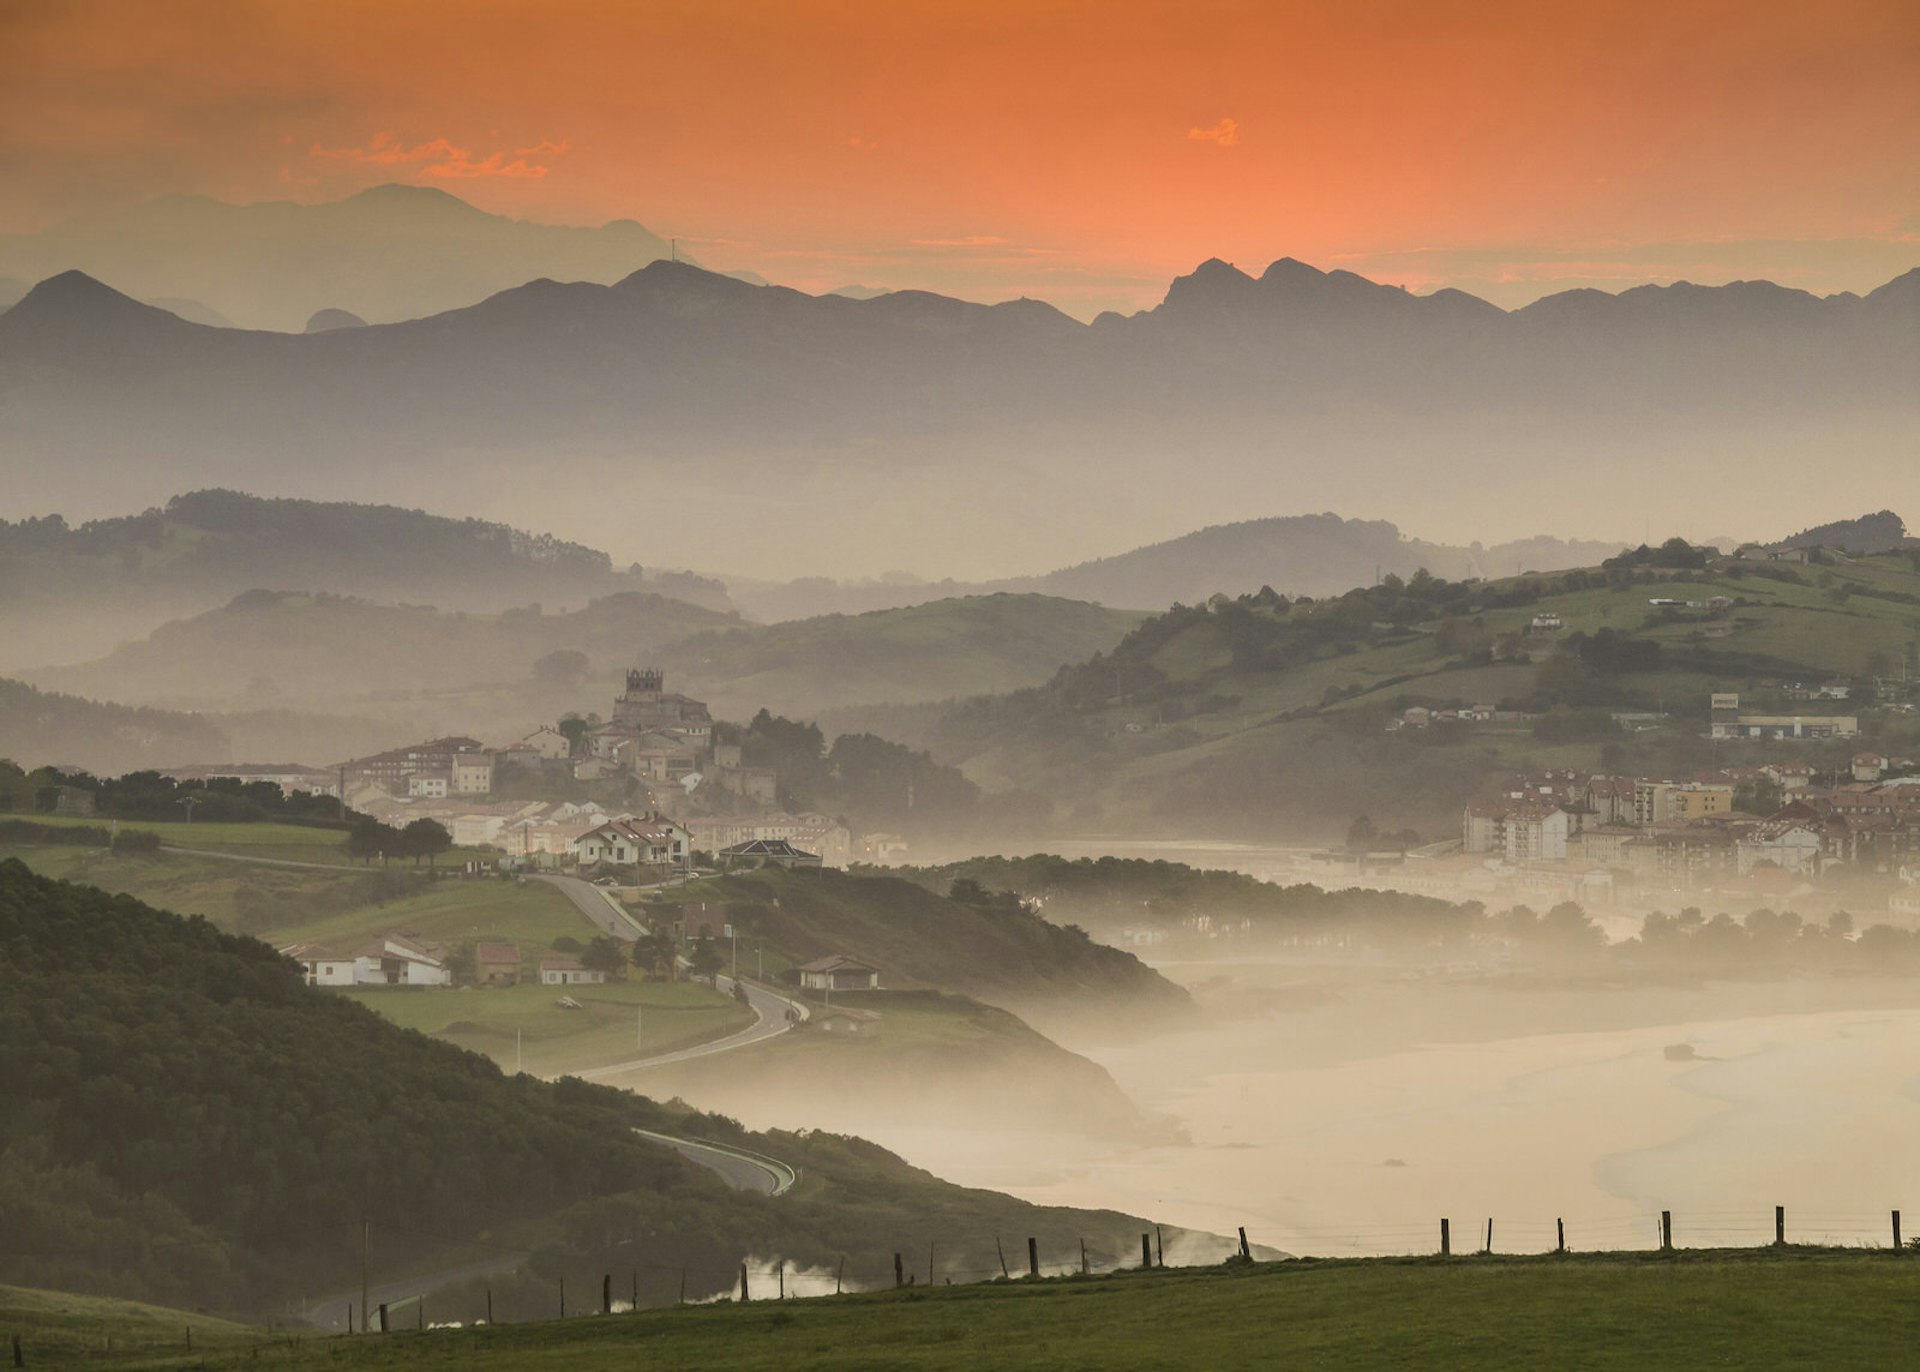 Mist rises as the sun sets on San Vicente de la Barquera, one of Cantabria's many picturesque towns © Javier Fernández Sánchez / Getty Images